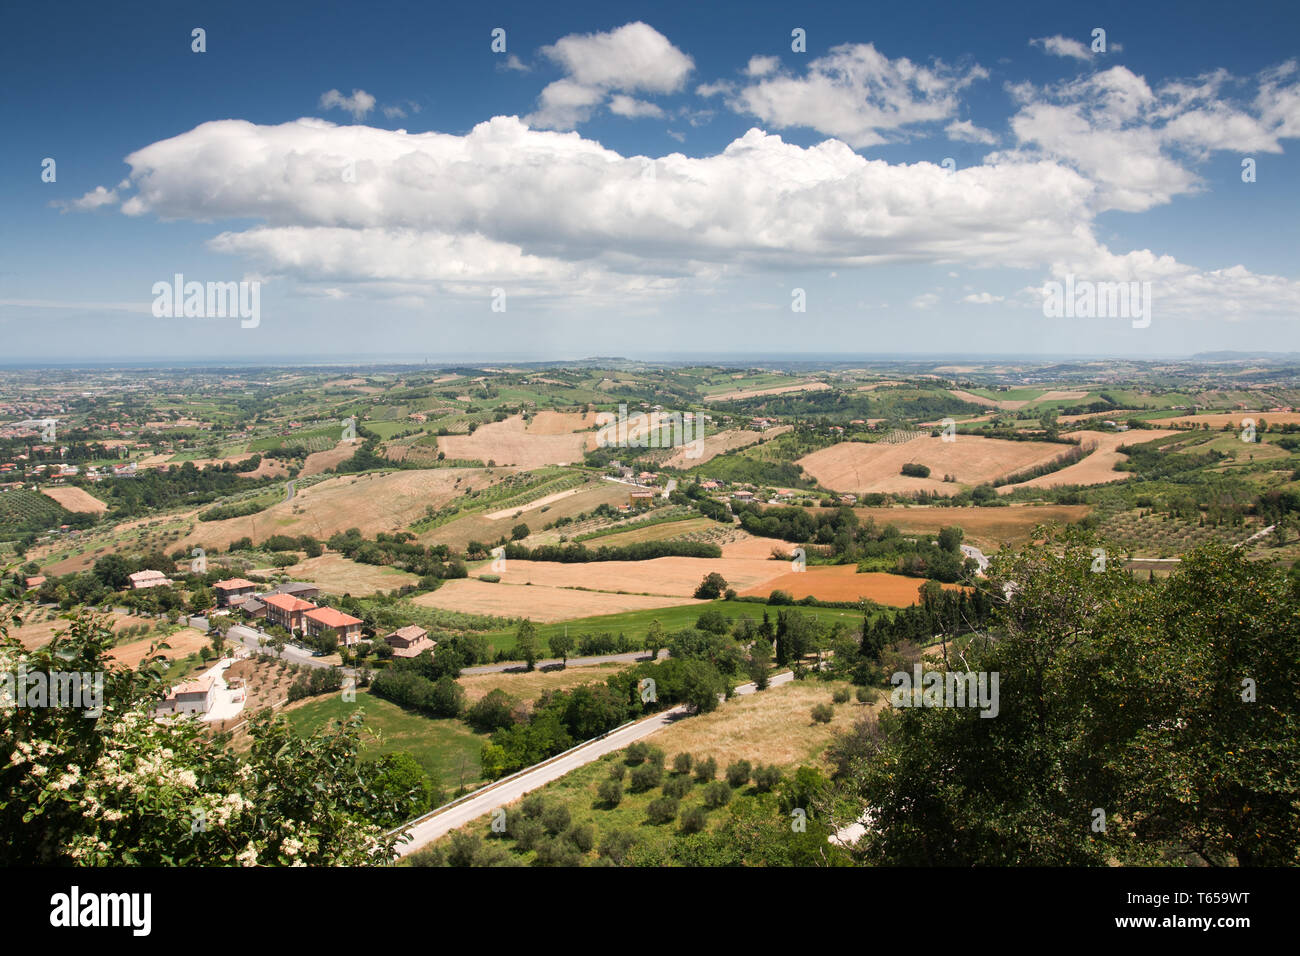 Beautiful Landscape, Marche or the Marches, a Region in Italy Stock Photo